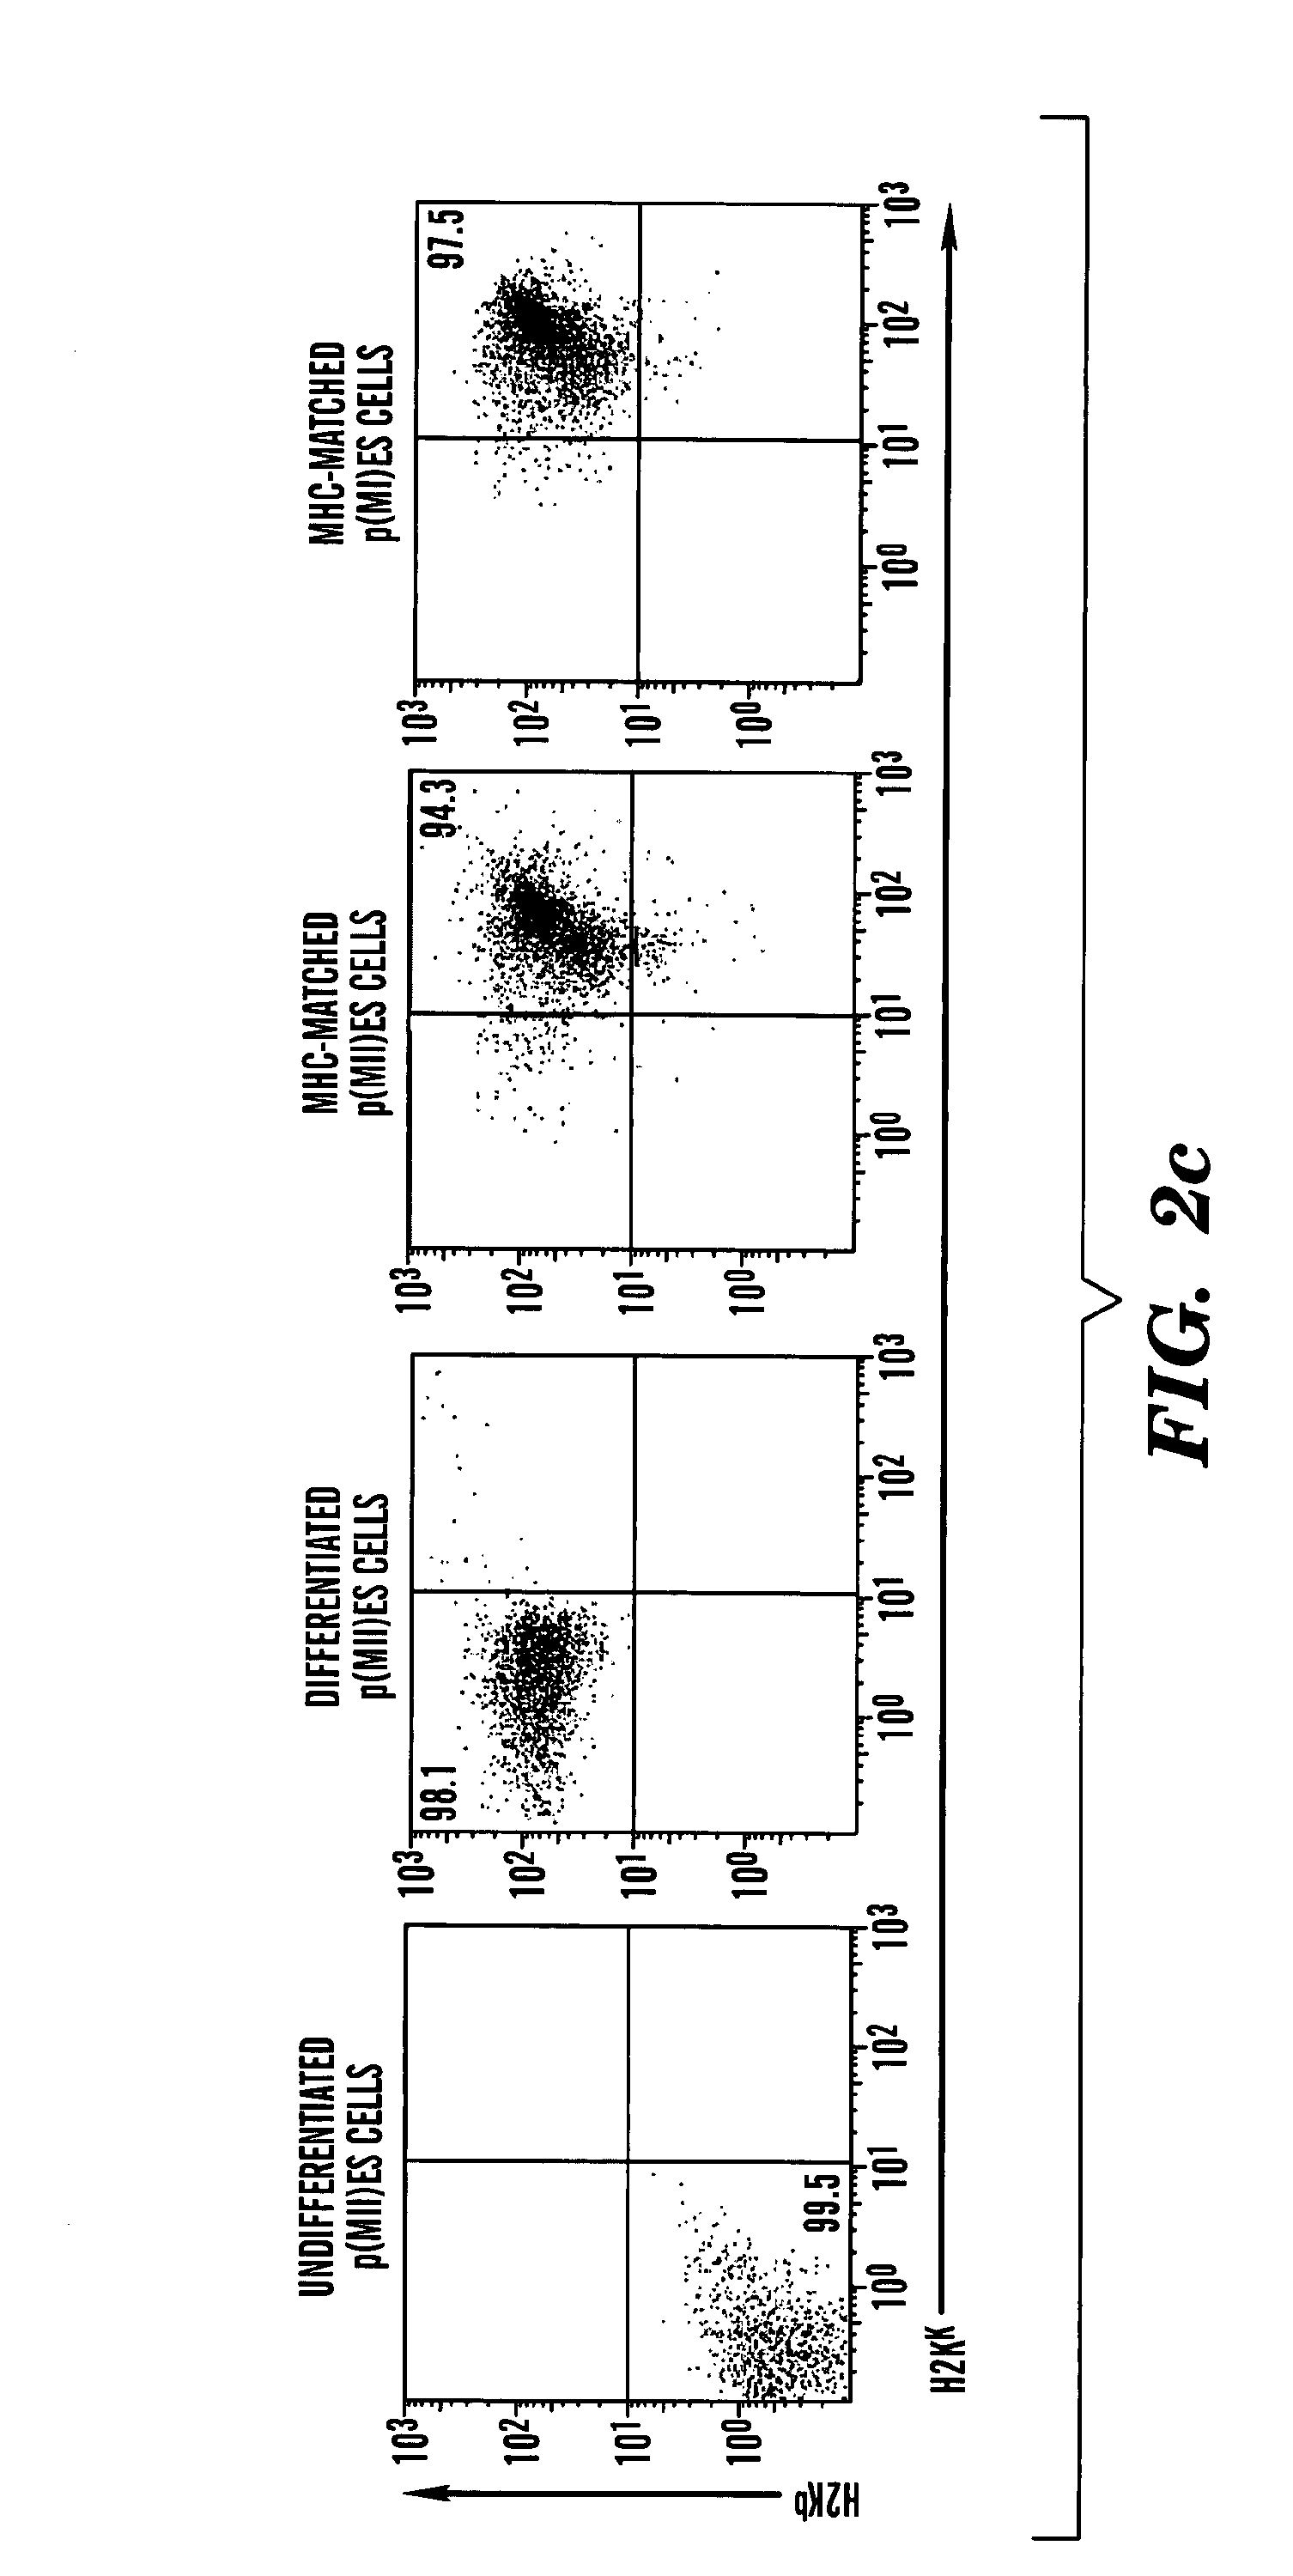 Methods for producing embryonic stem cells from parthenogenetic embryos